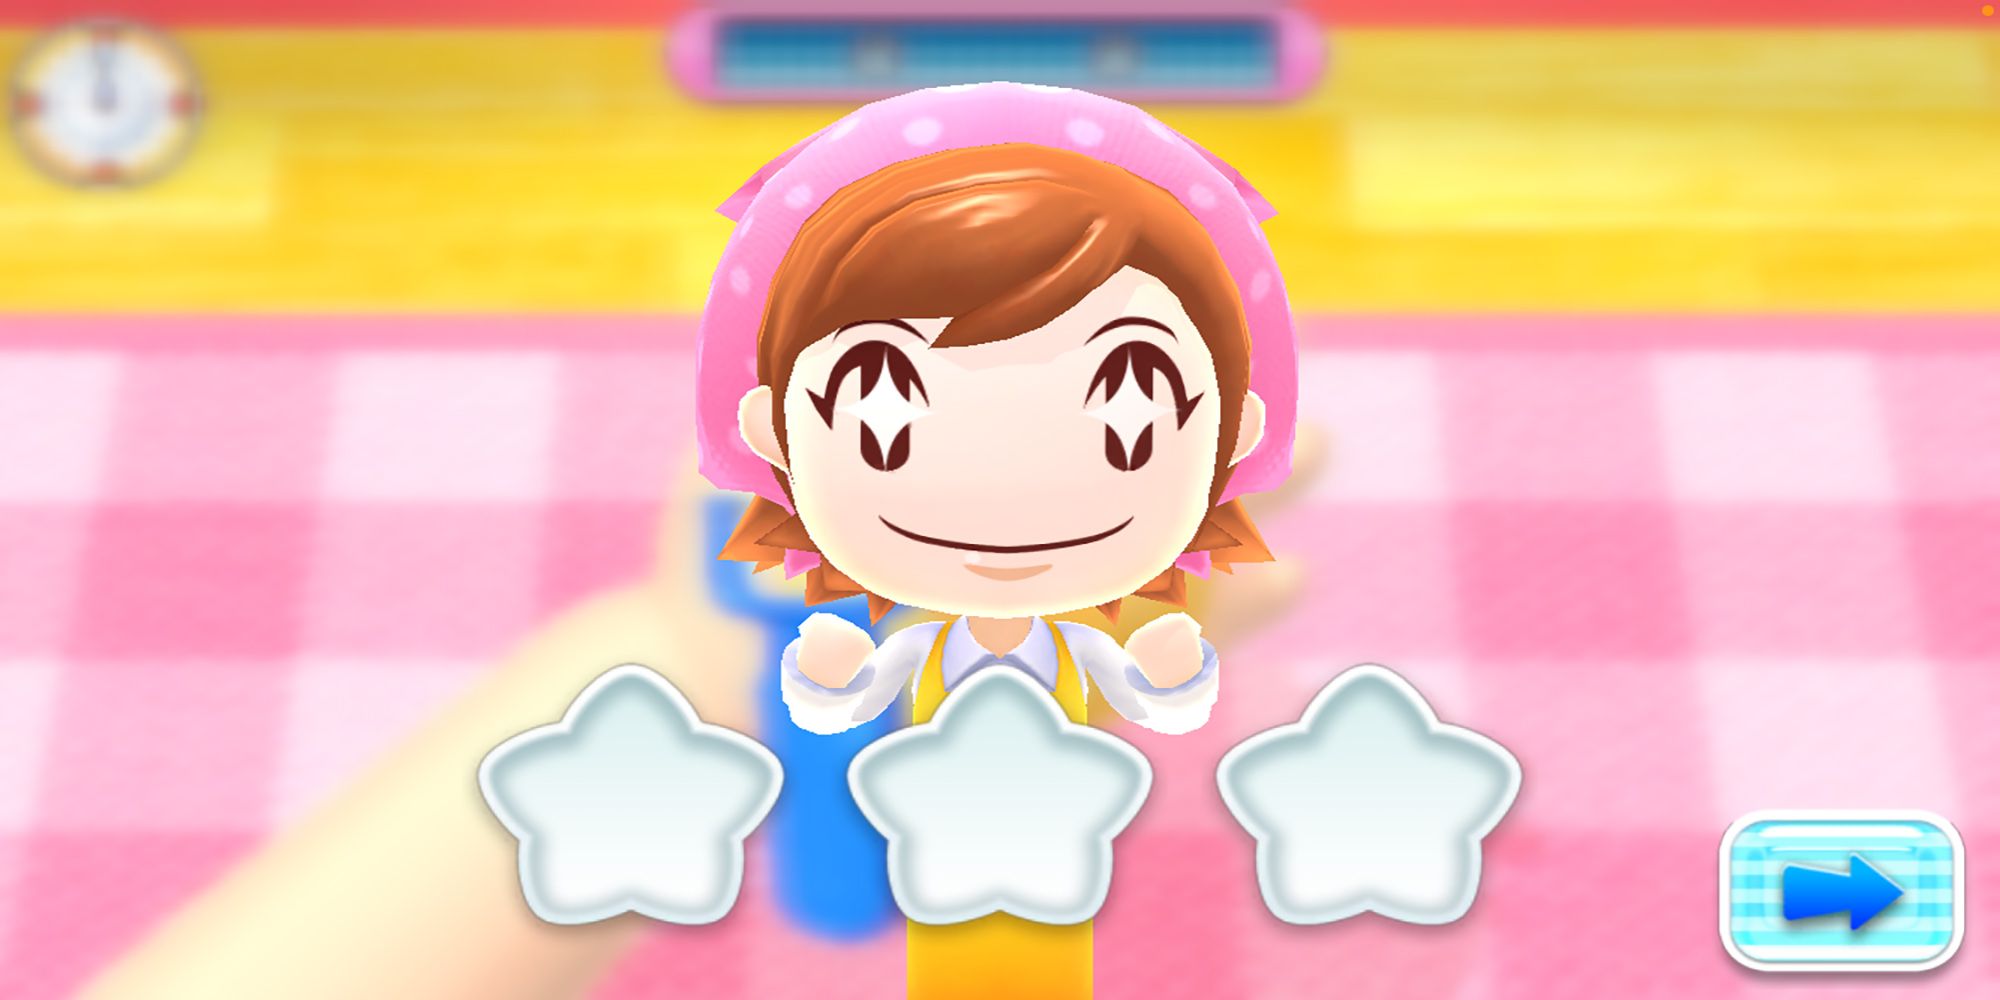 After you barely peeled a single potato, Cooking Mama encouraged you and said "you can do it," in Cooking Mama: Cuisine!